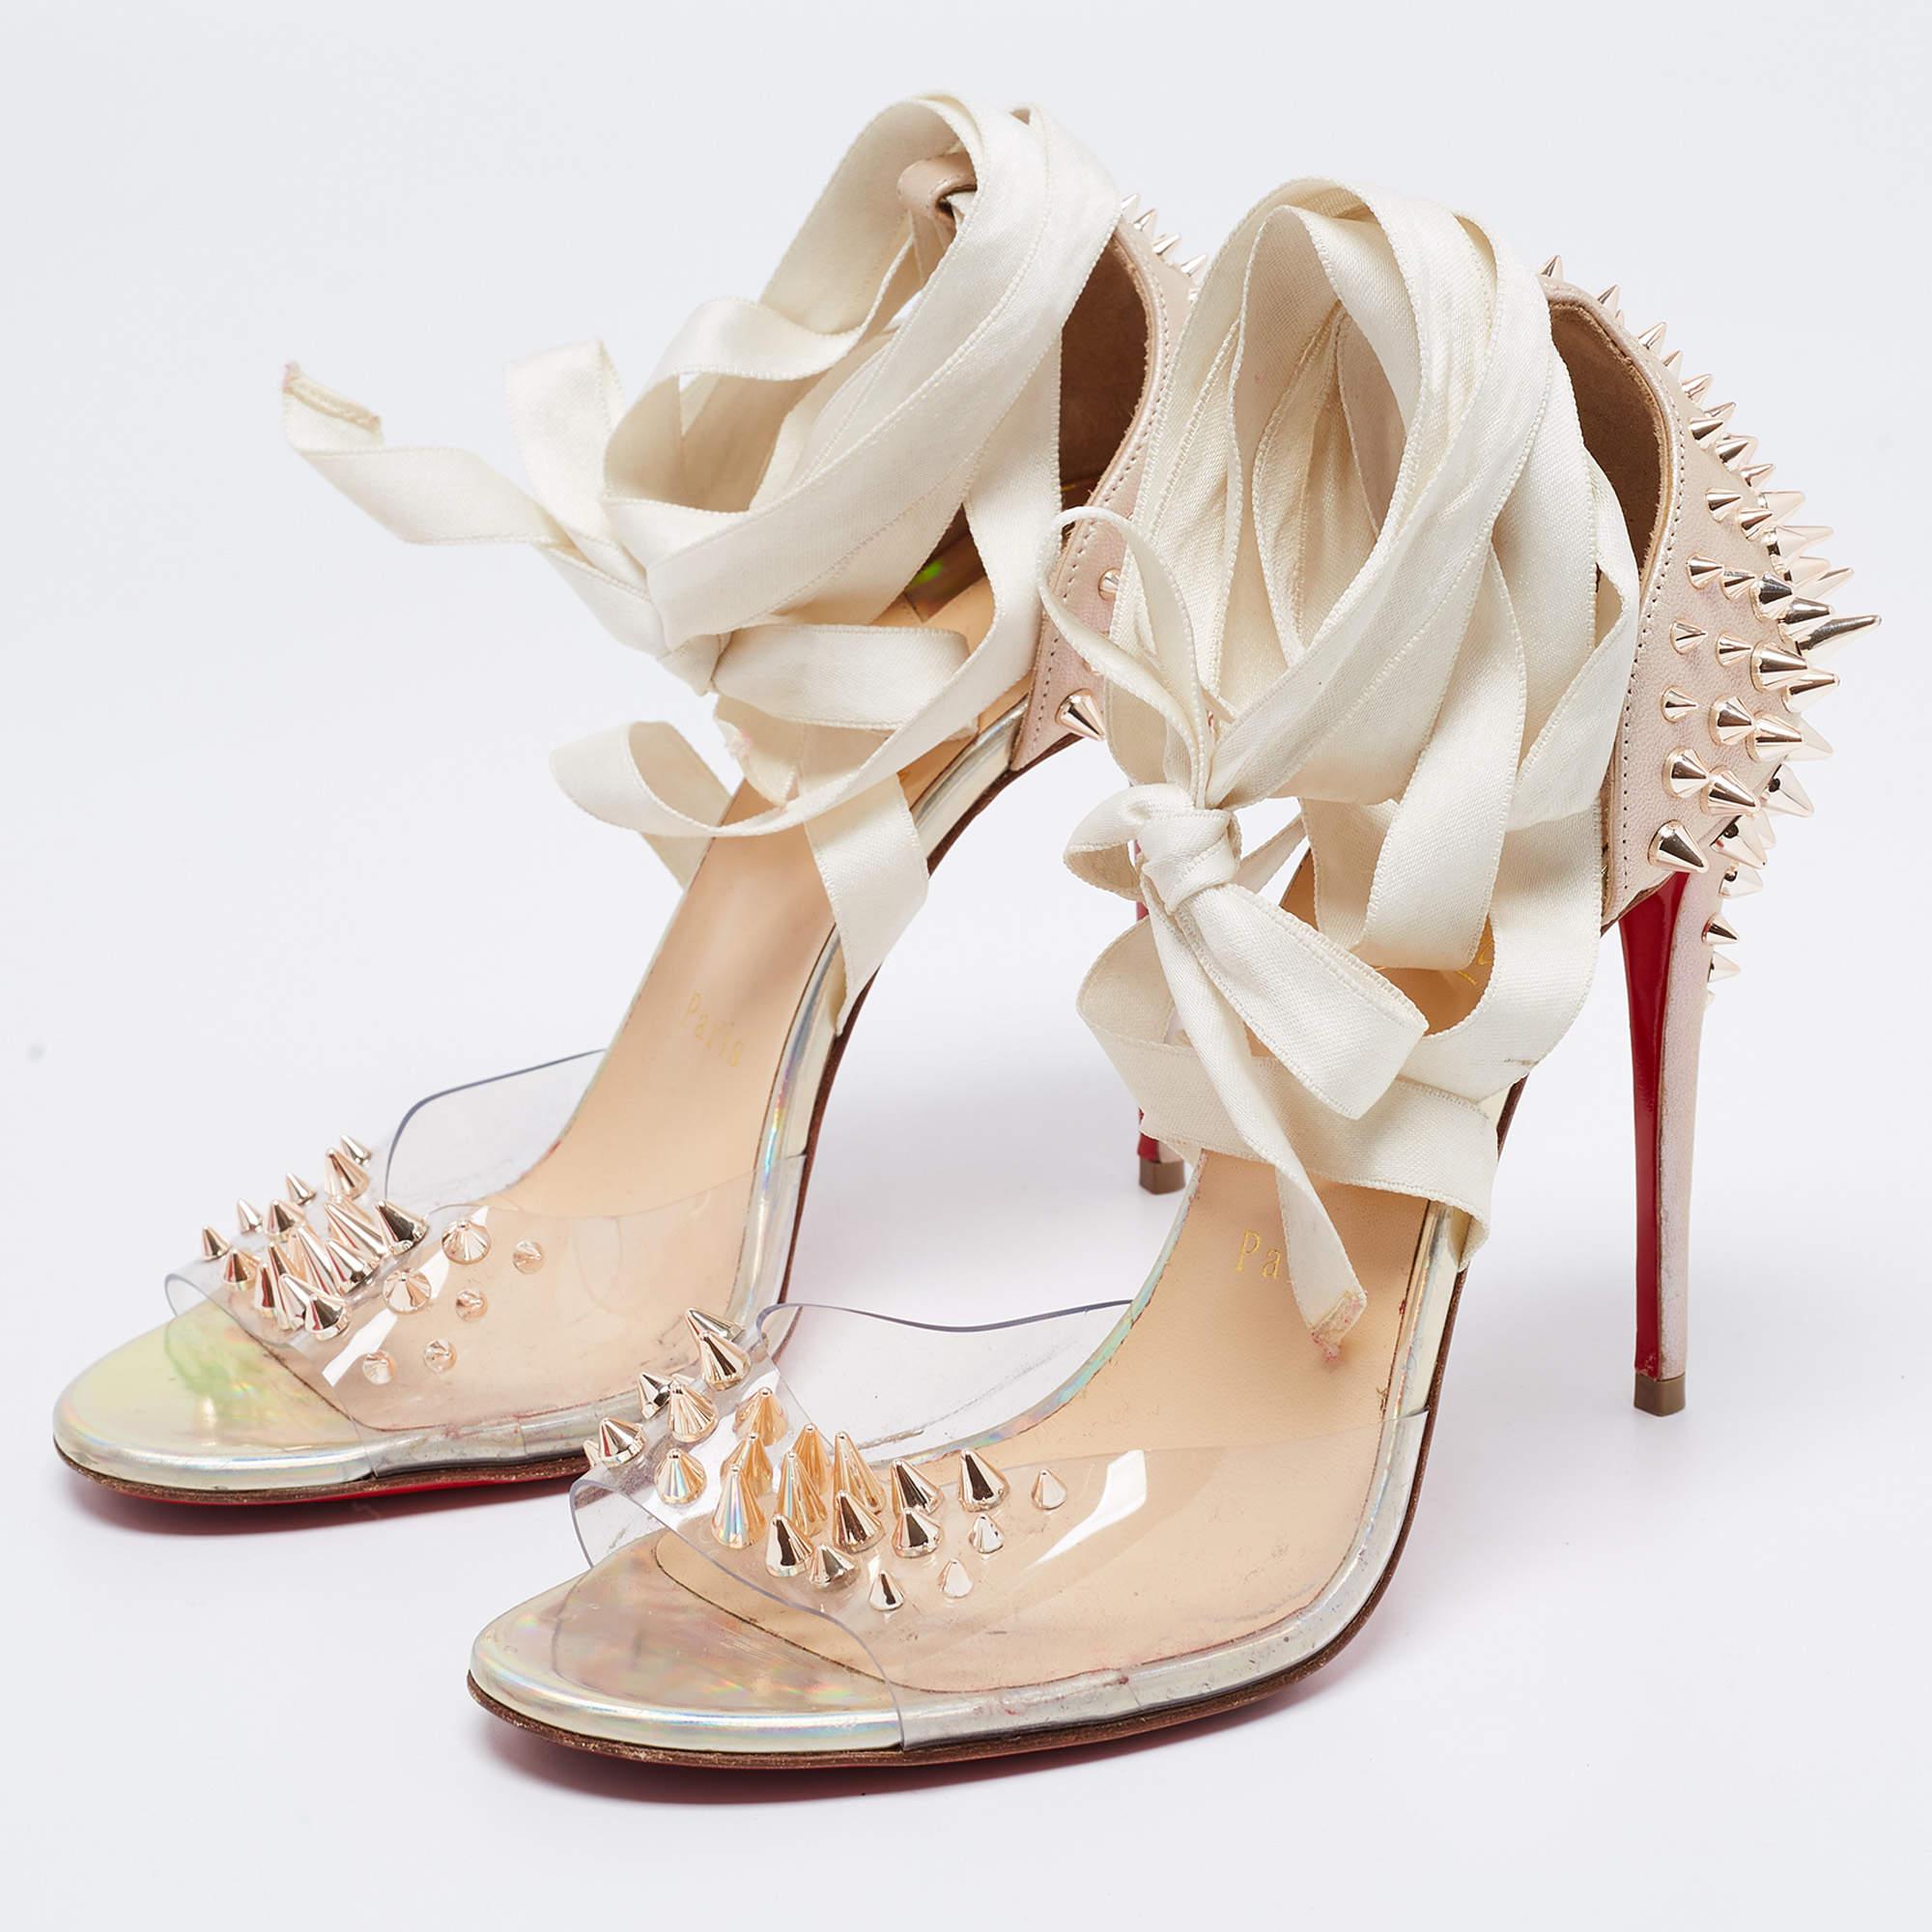 Christian Louboutin Beige Studded Leather and PVC Ankle Tie Sandals Size 37 1